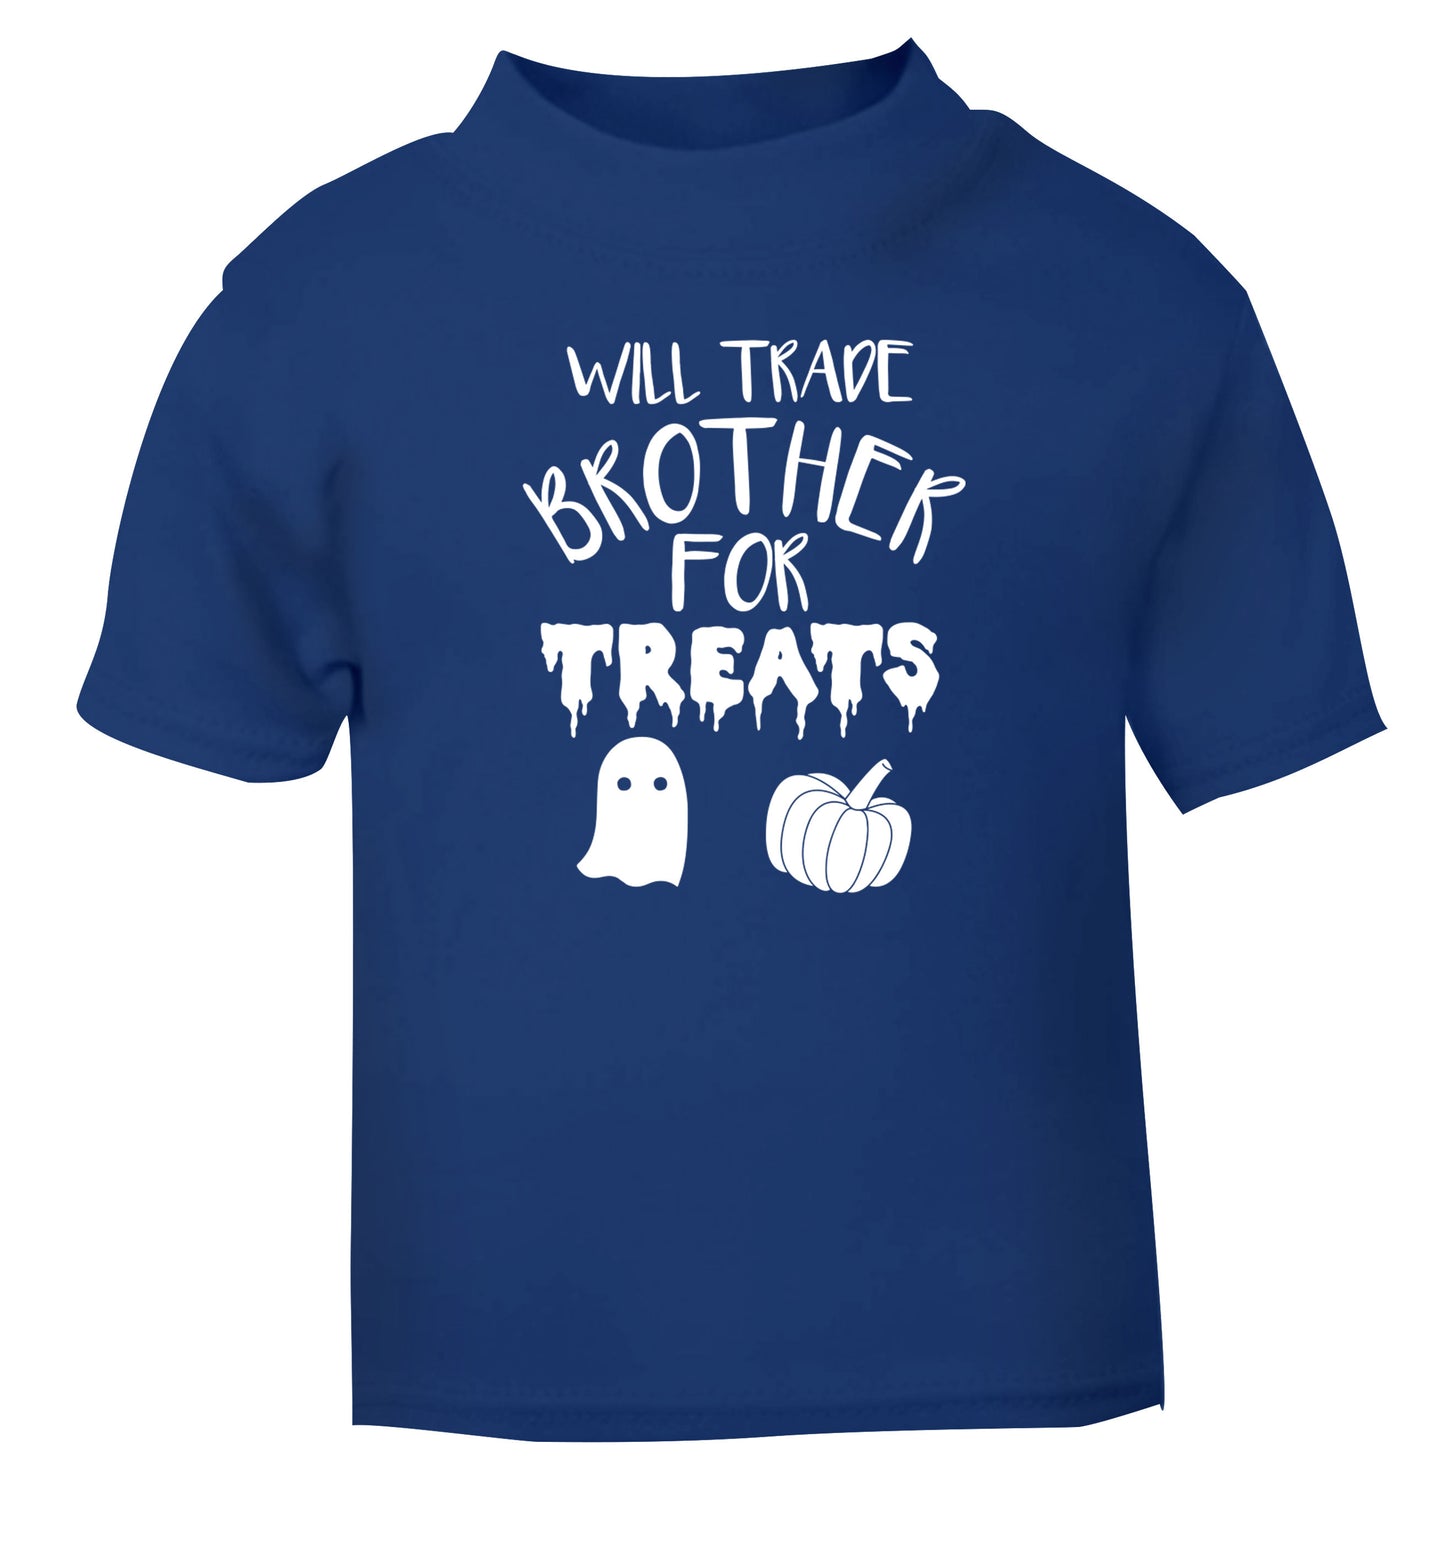 Will trade brother for treats blue Baby Toddler Tshirt 2 Years